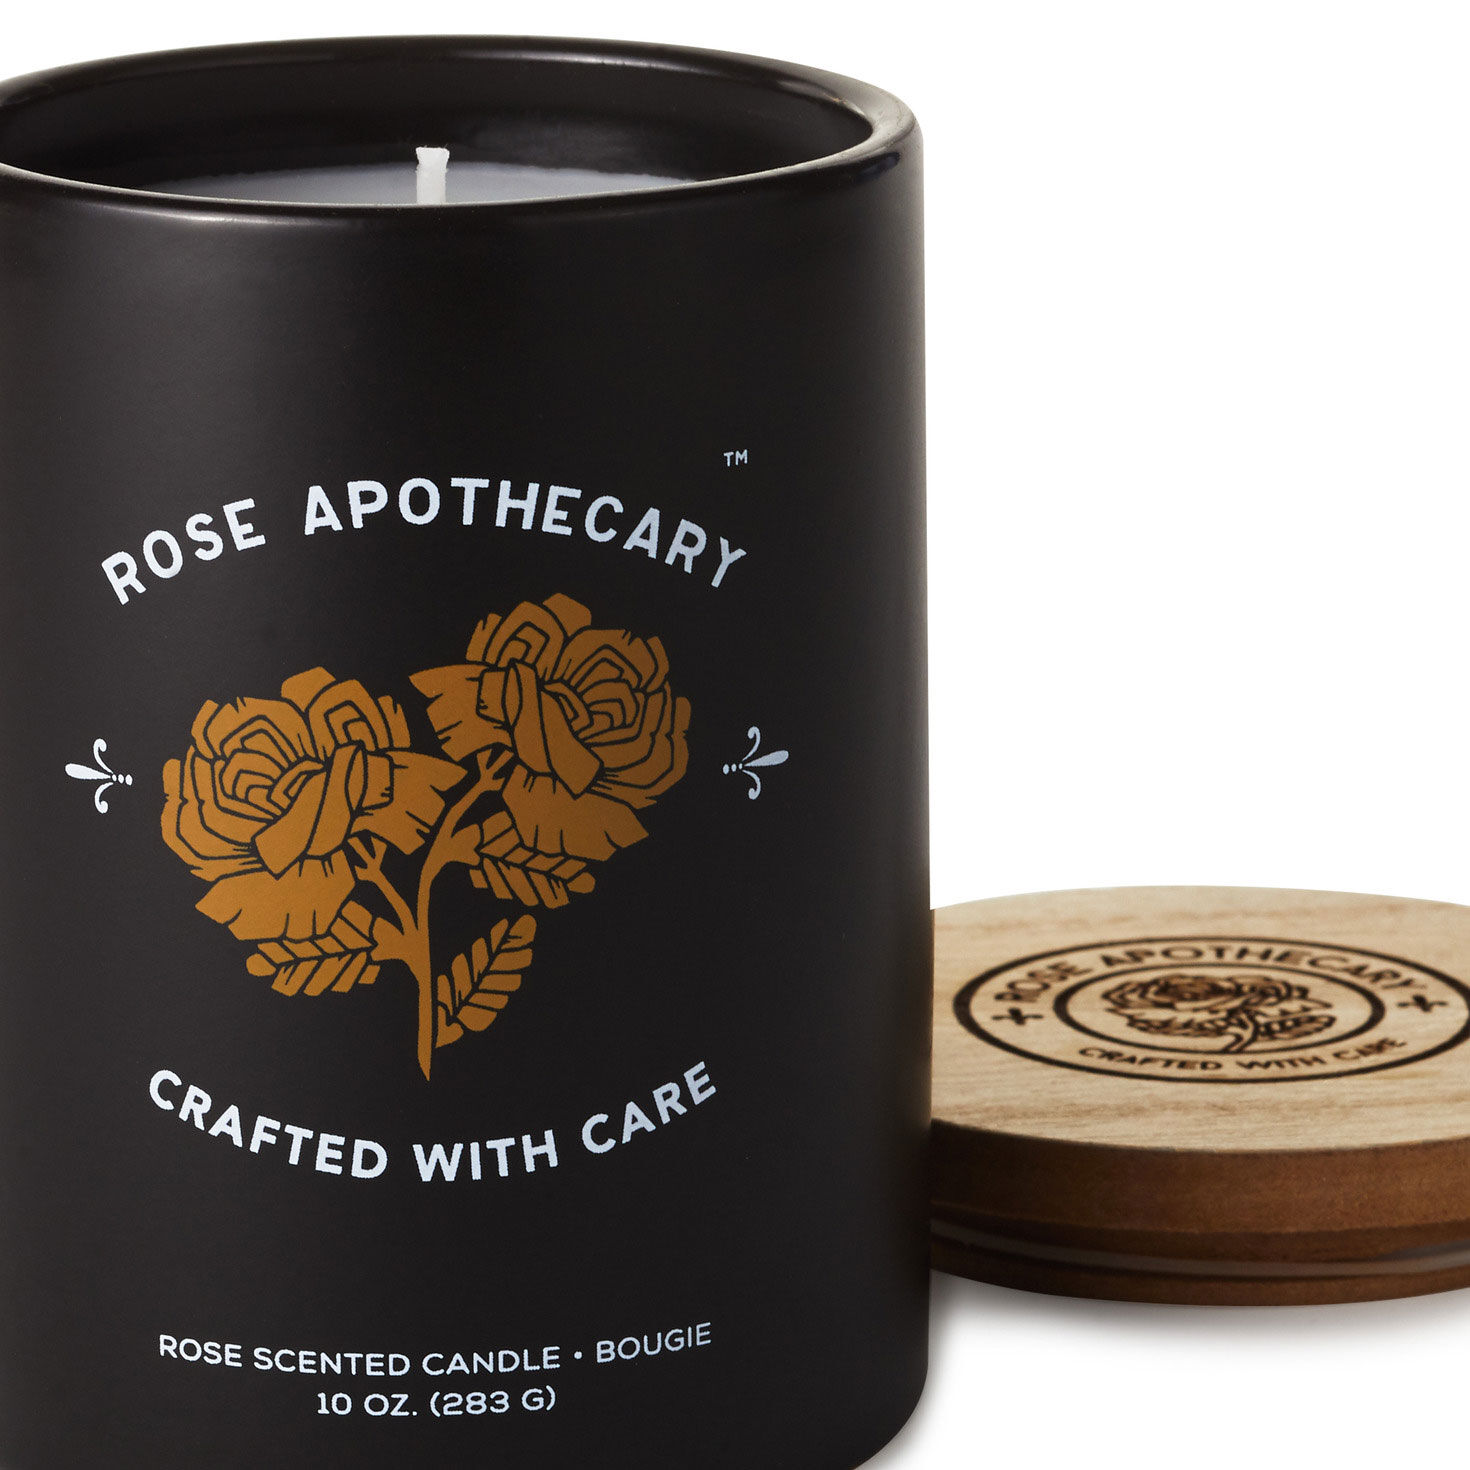 Schitt's Creek® Rose Apothecary Rose-Scented Jar Candle, 10 oz. for only USD 24.99 | Hallmark